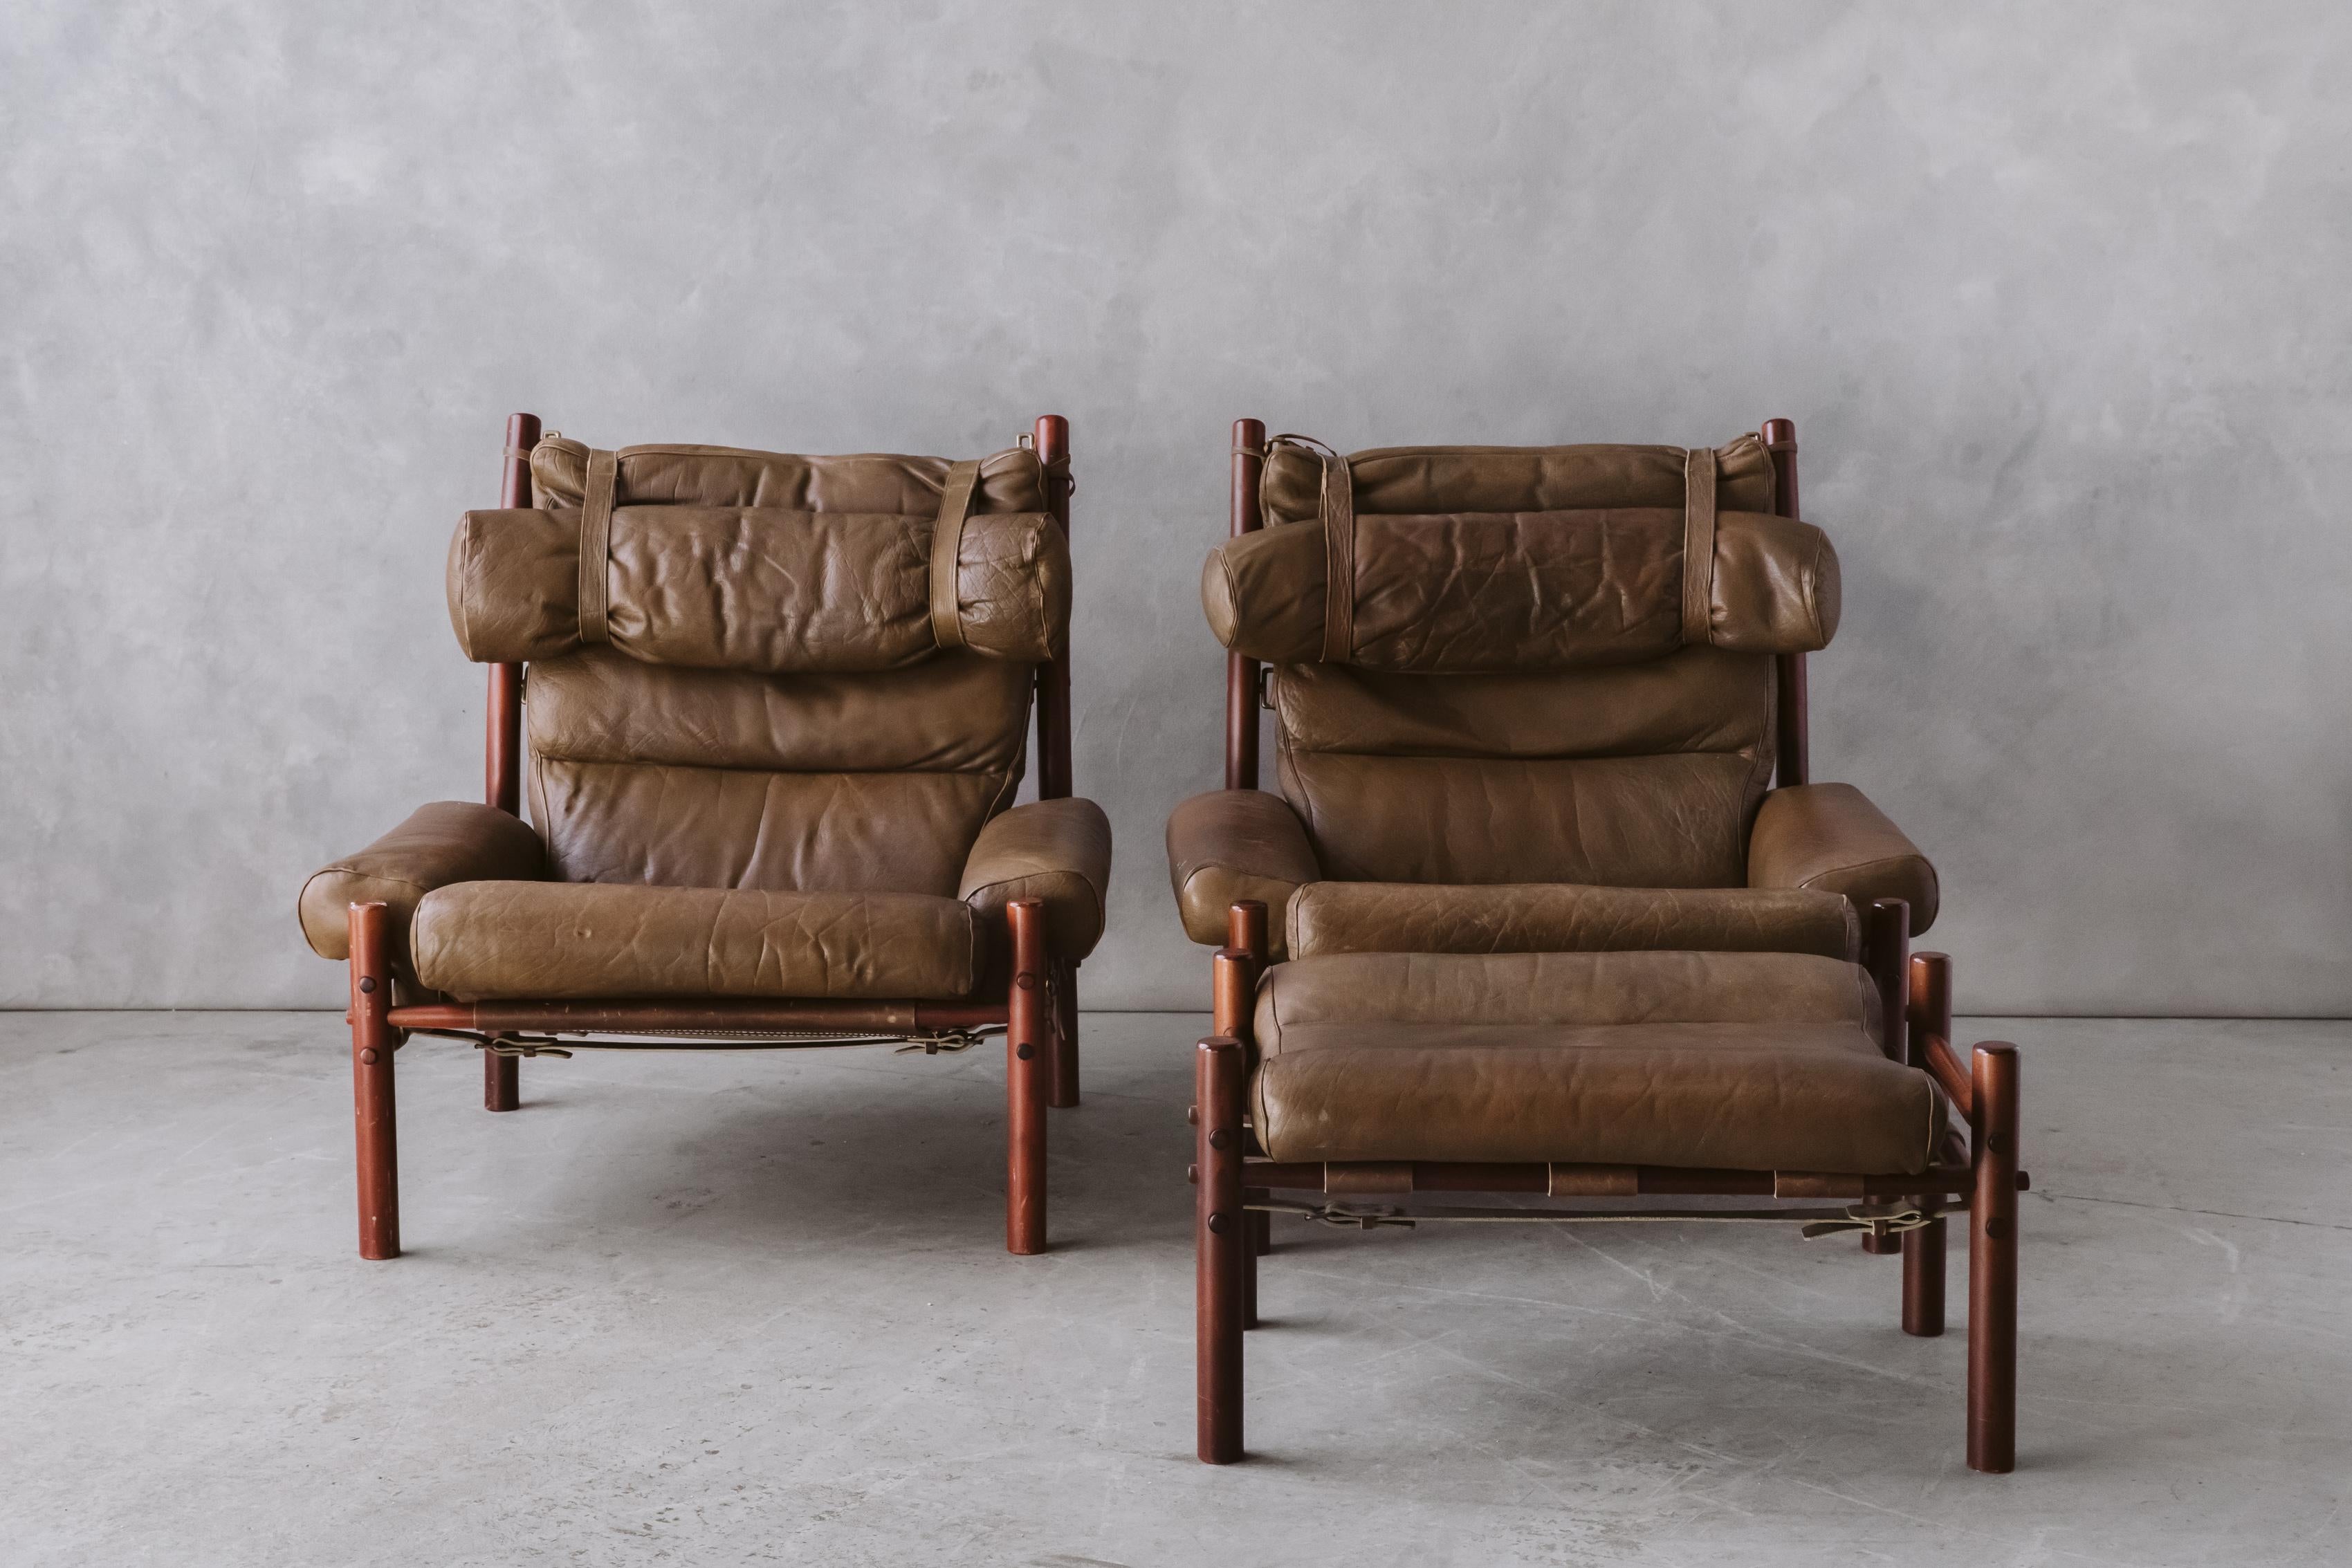 Vintage Pair Of Arne Norell Lounge Chairs, Model Inca, circa 1970. Original brown leather upholstery on a stained birch frame. Nice wear and patina. Includes one ottoman.

We prefer to speak directly with our clients. So, If you have any questions